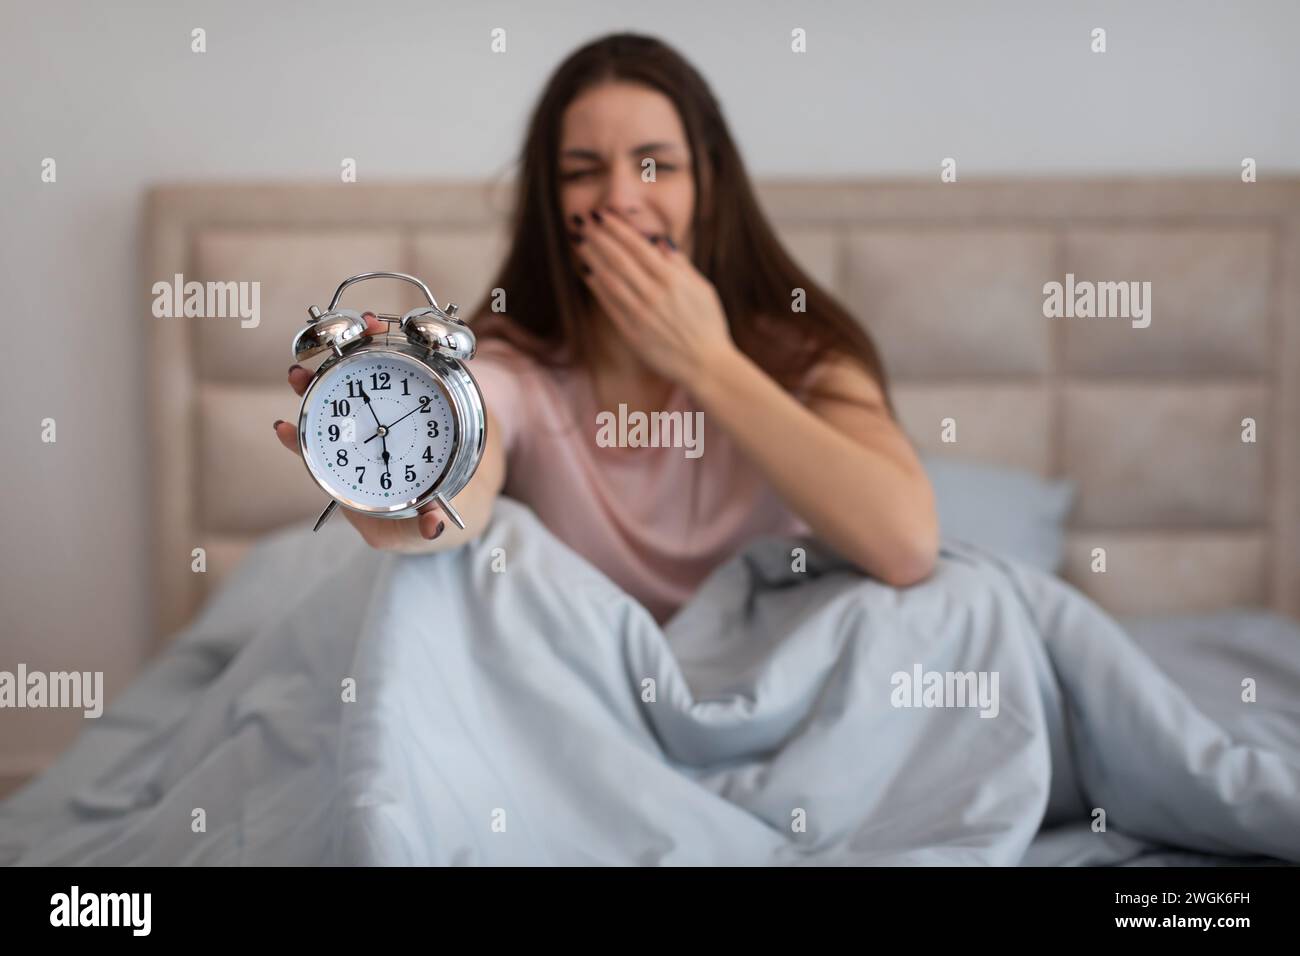 Sleepy woman in bed yawning, holding alarm clock in the morning Stock Photo